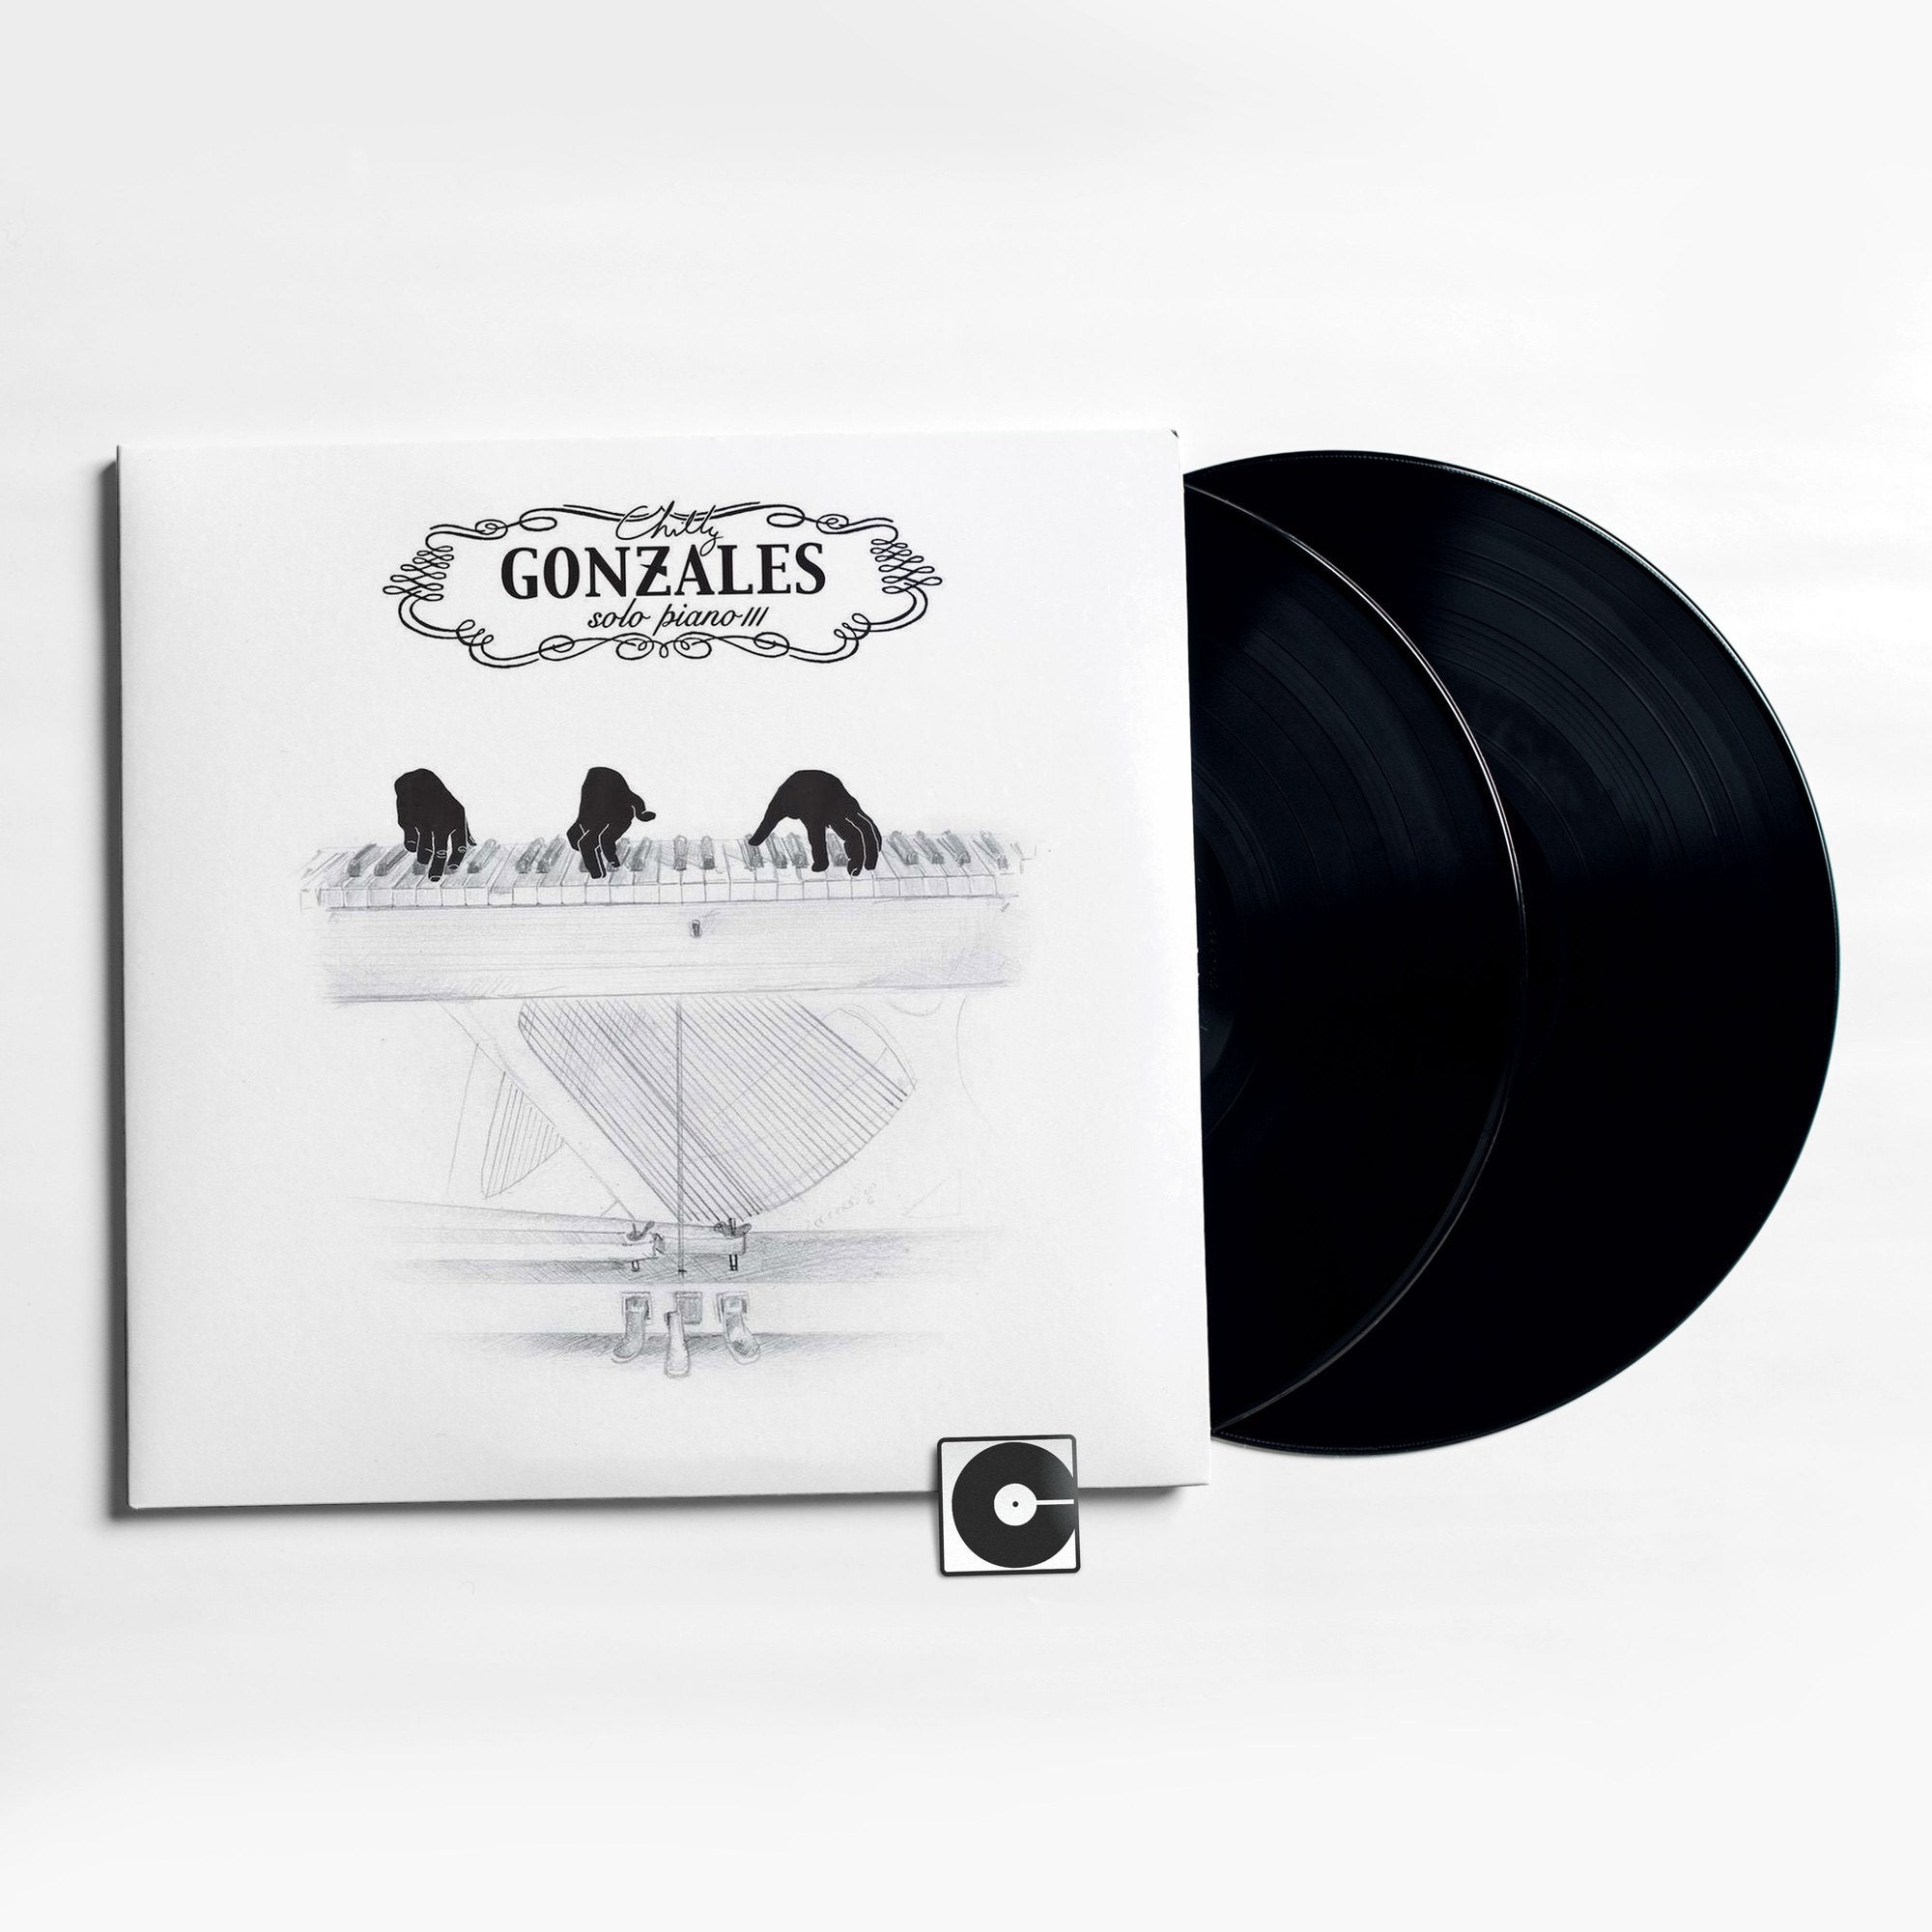 Solo Piano III - Chilly Gonzales [Vinyl]